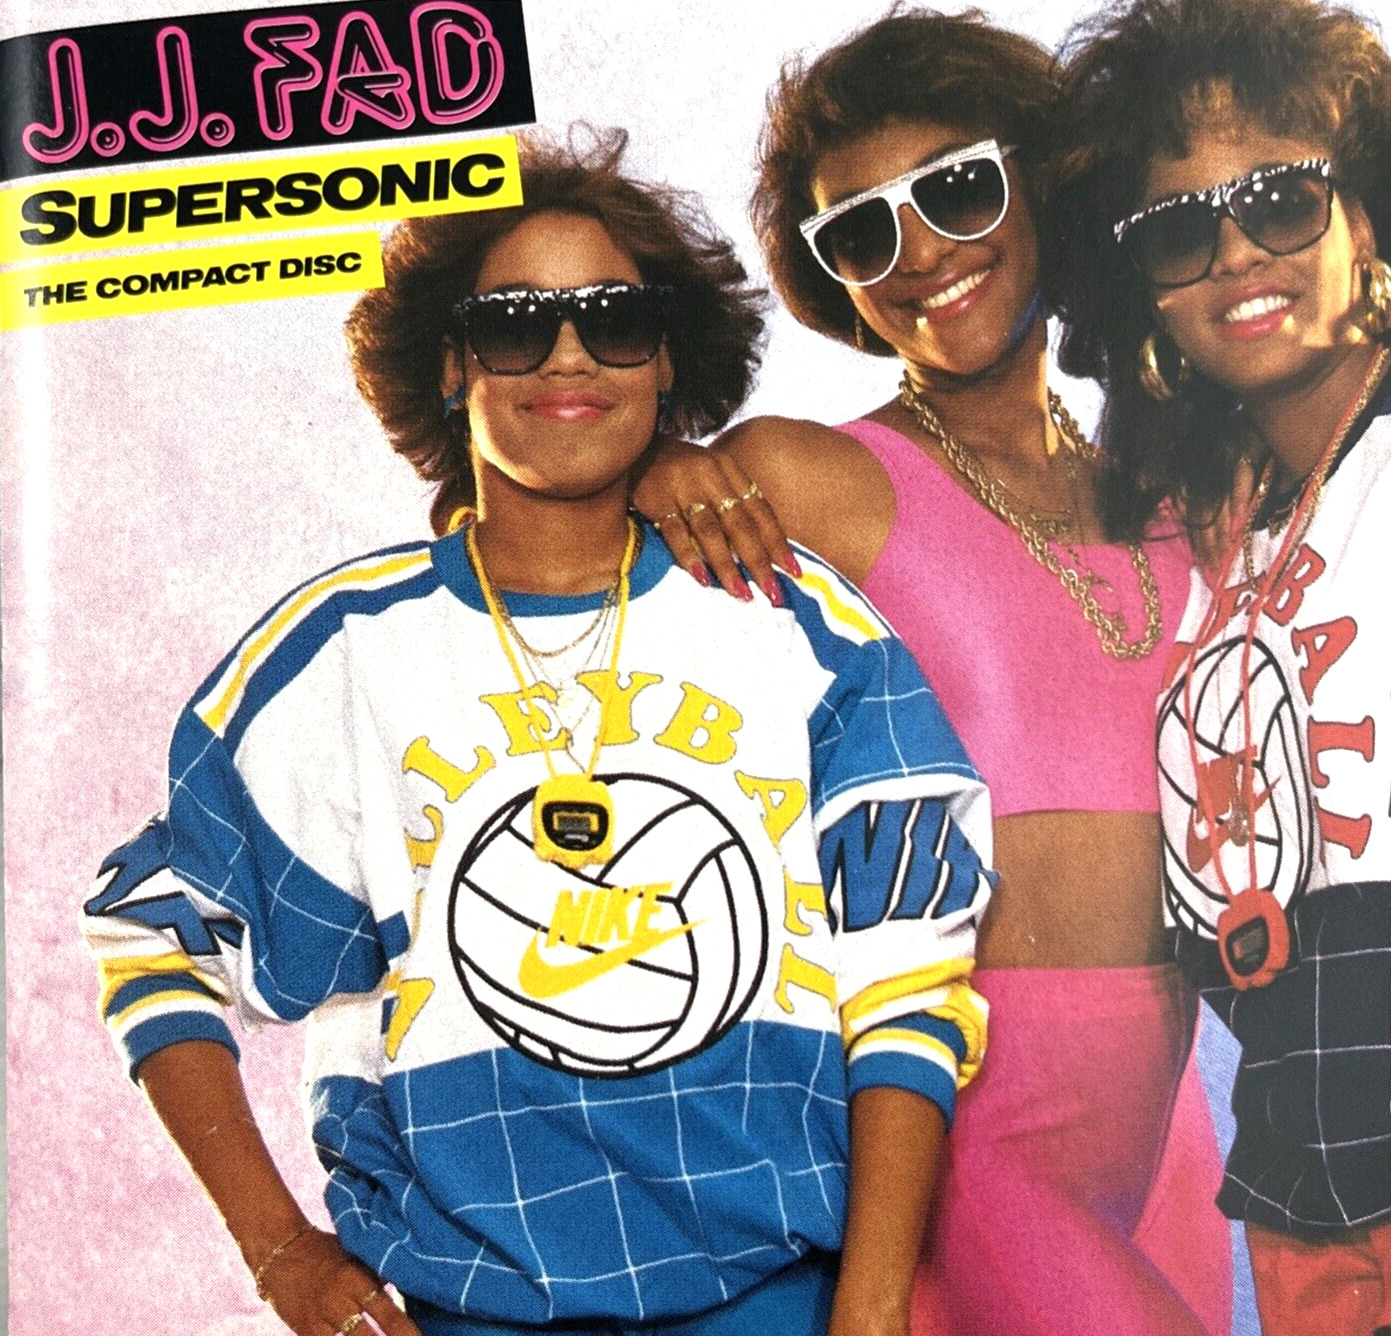 J.J. Fad - Supersonic  - The Compact Disc CD 1988 Ruthless Records Hip Hop VG+